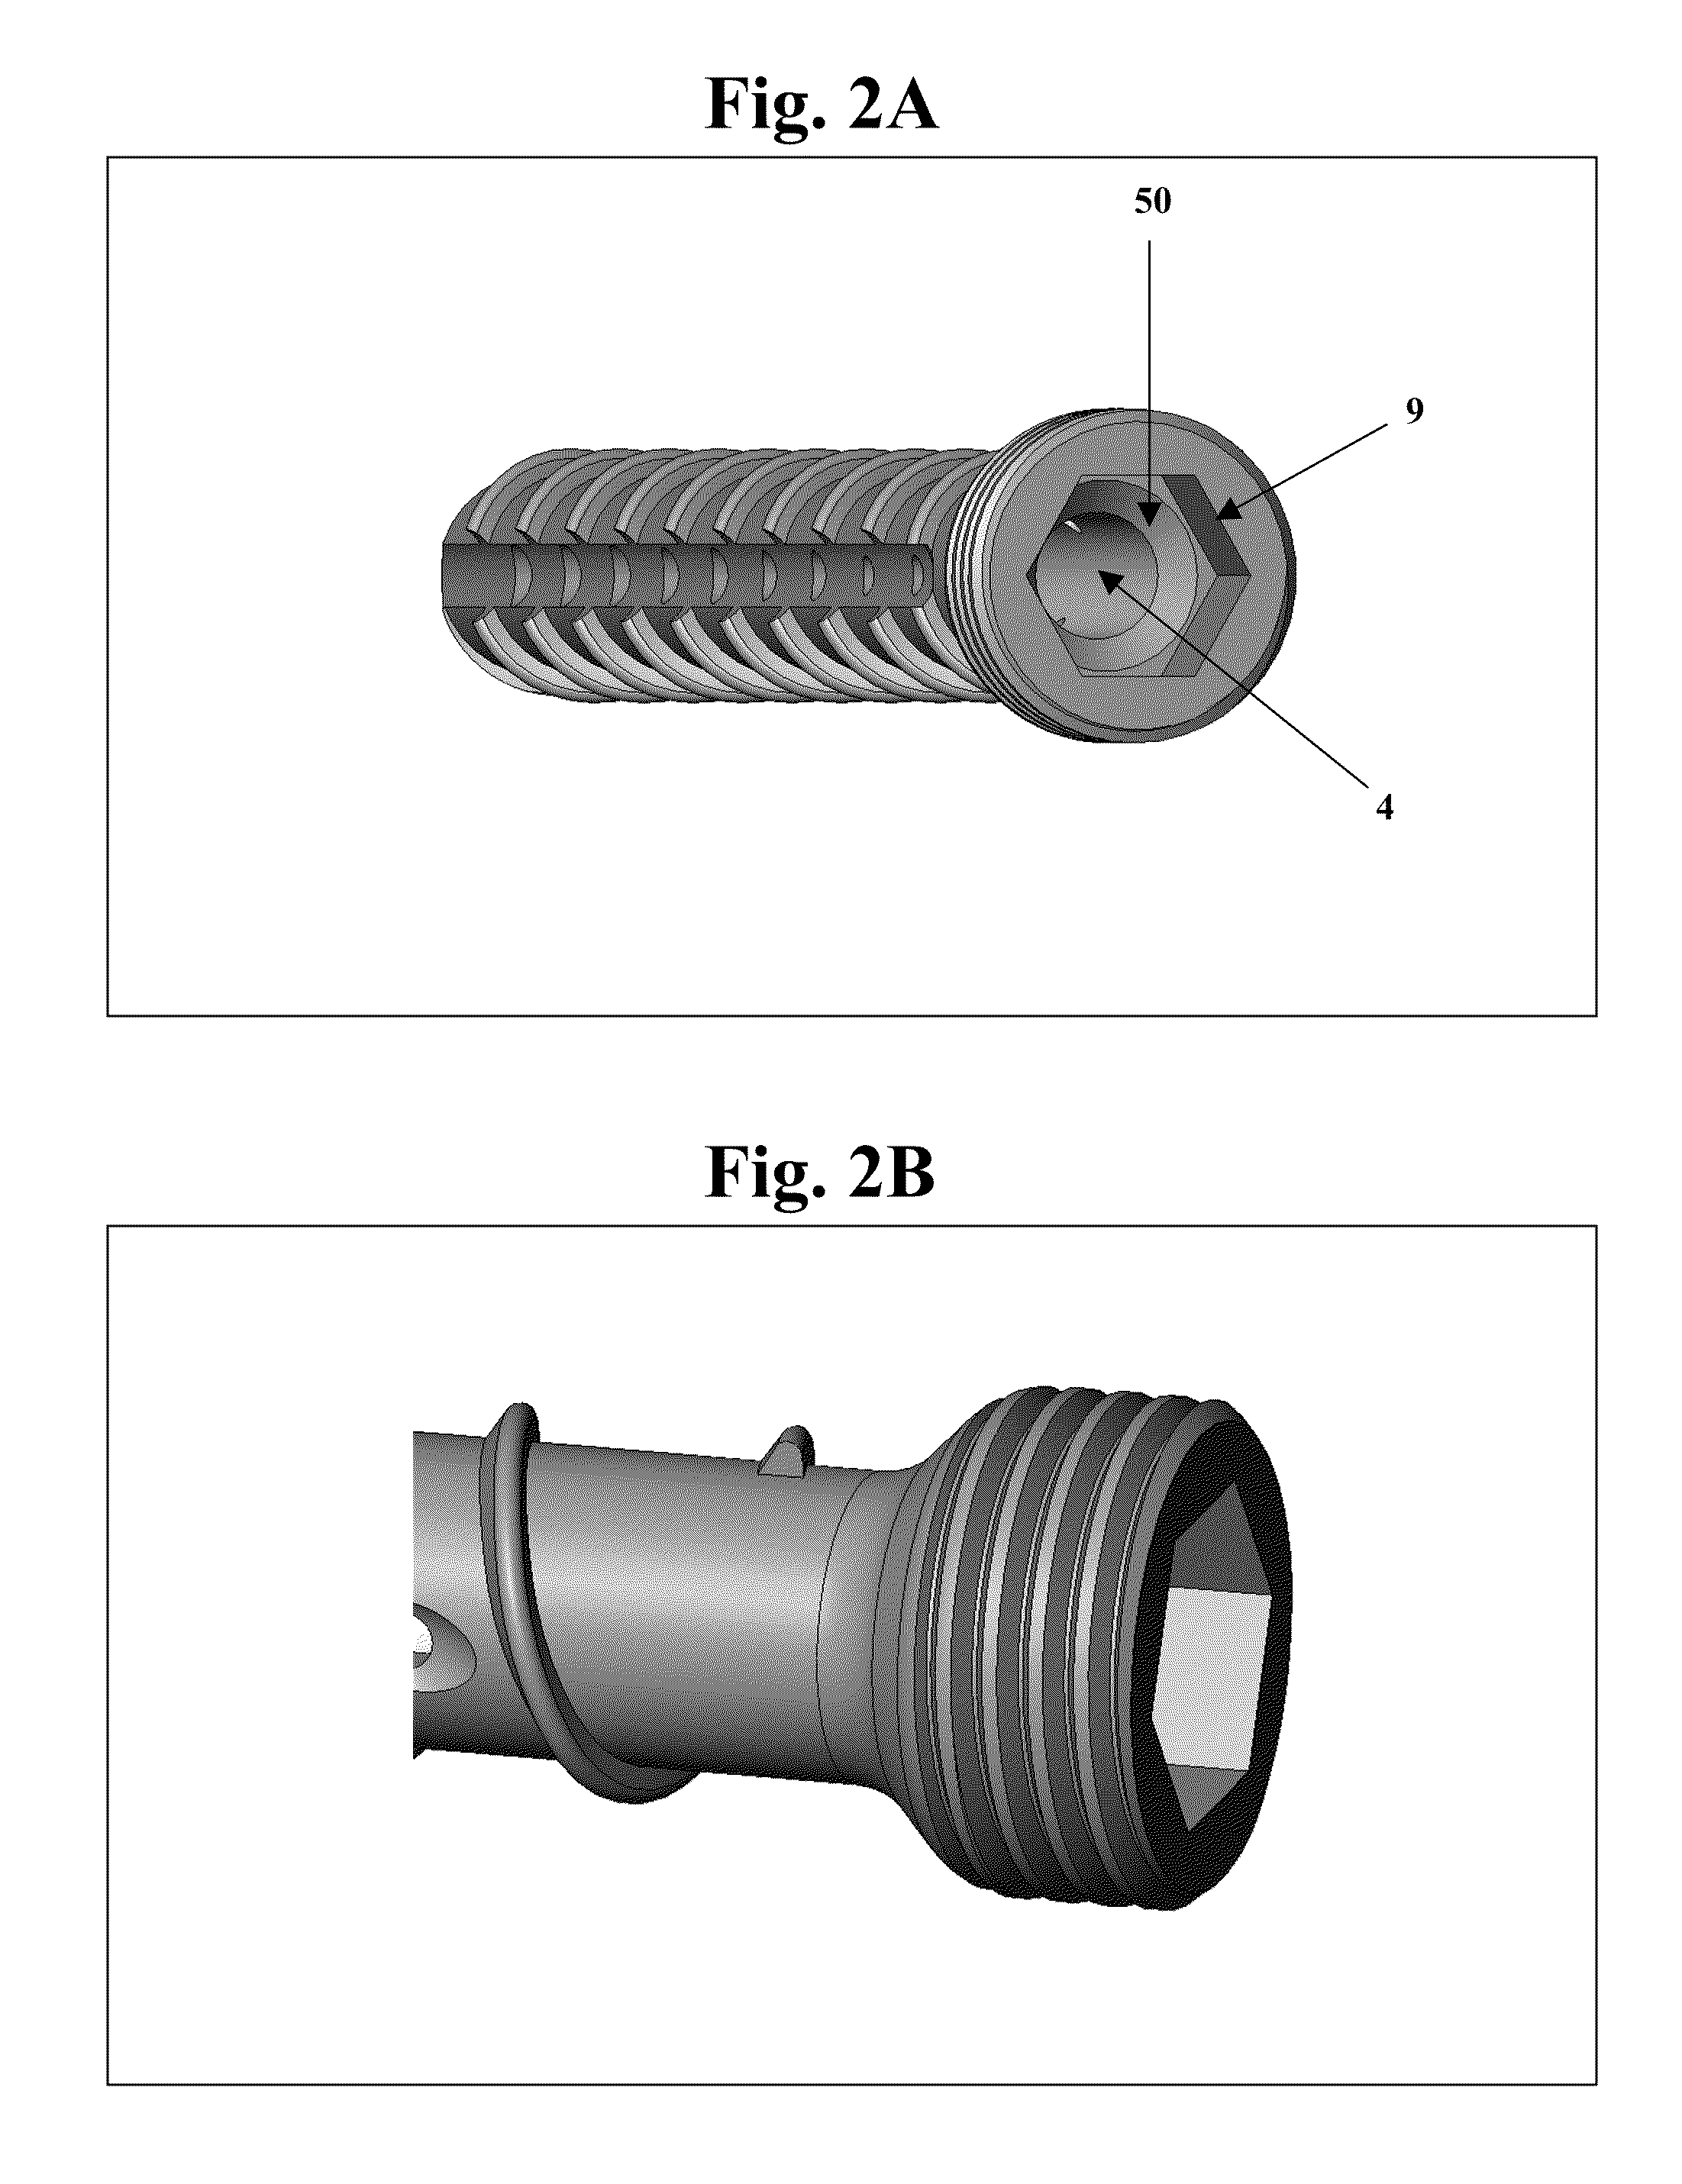 Bone screws and methods of use thereof